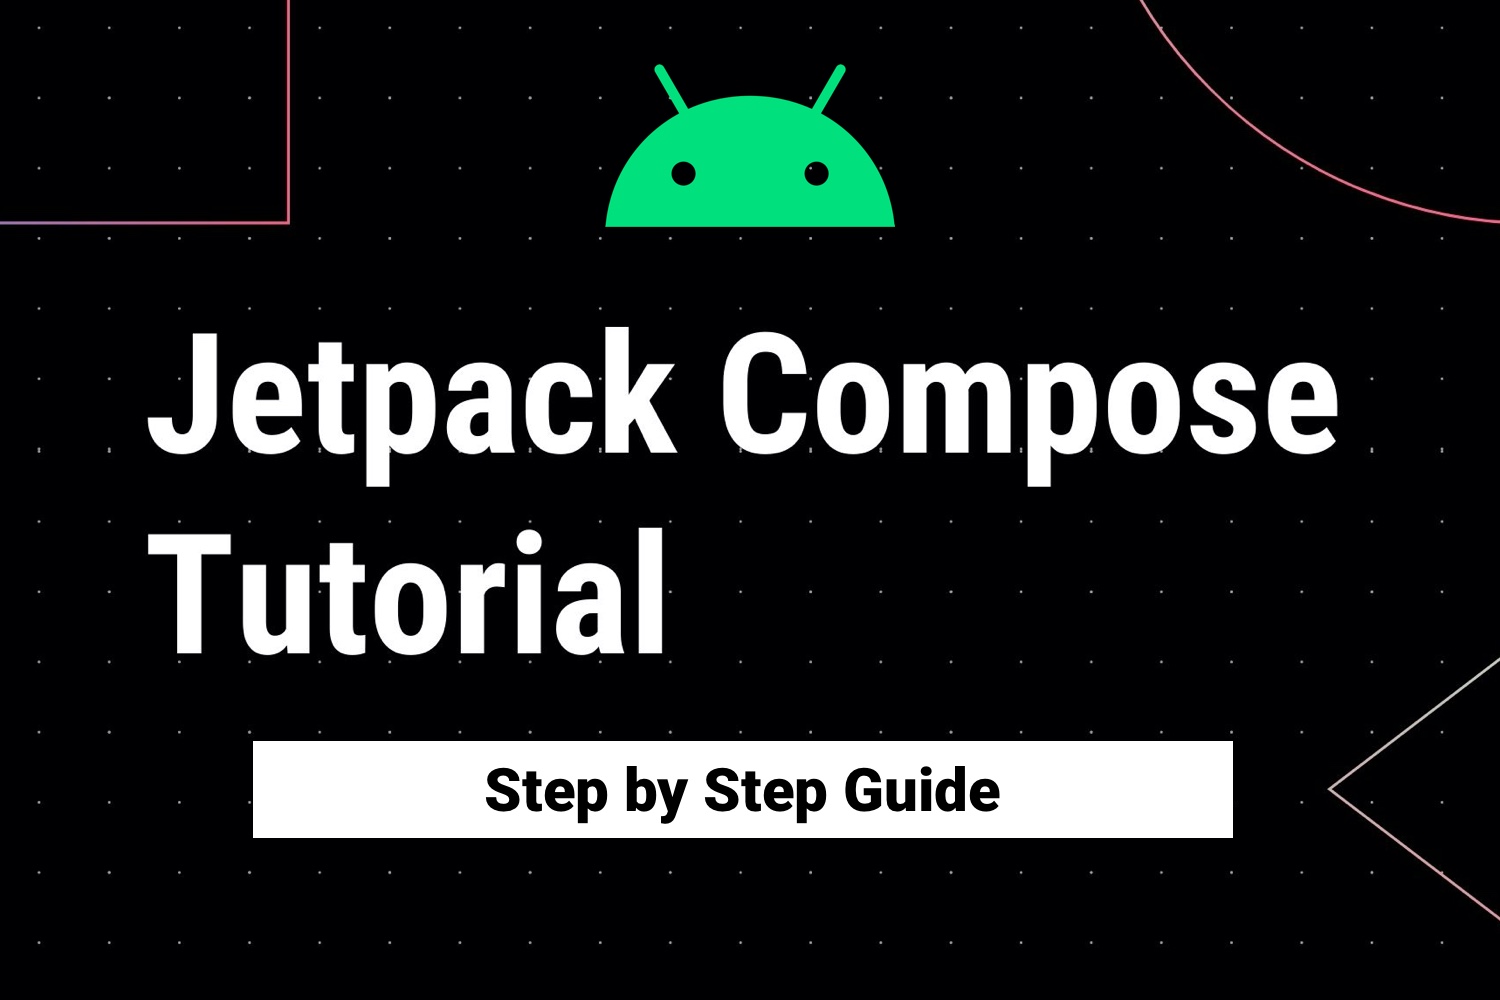 Jetpack Compose Tutorial - Step by Step Guide